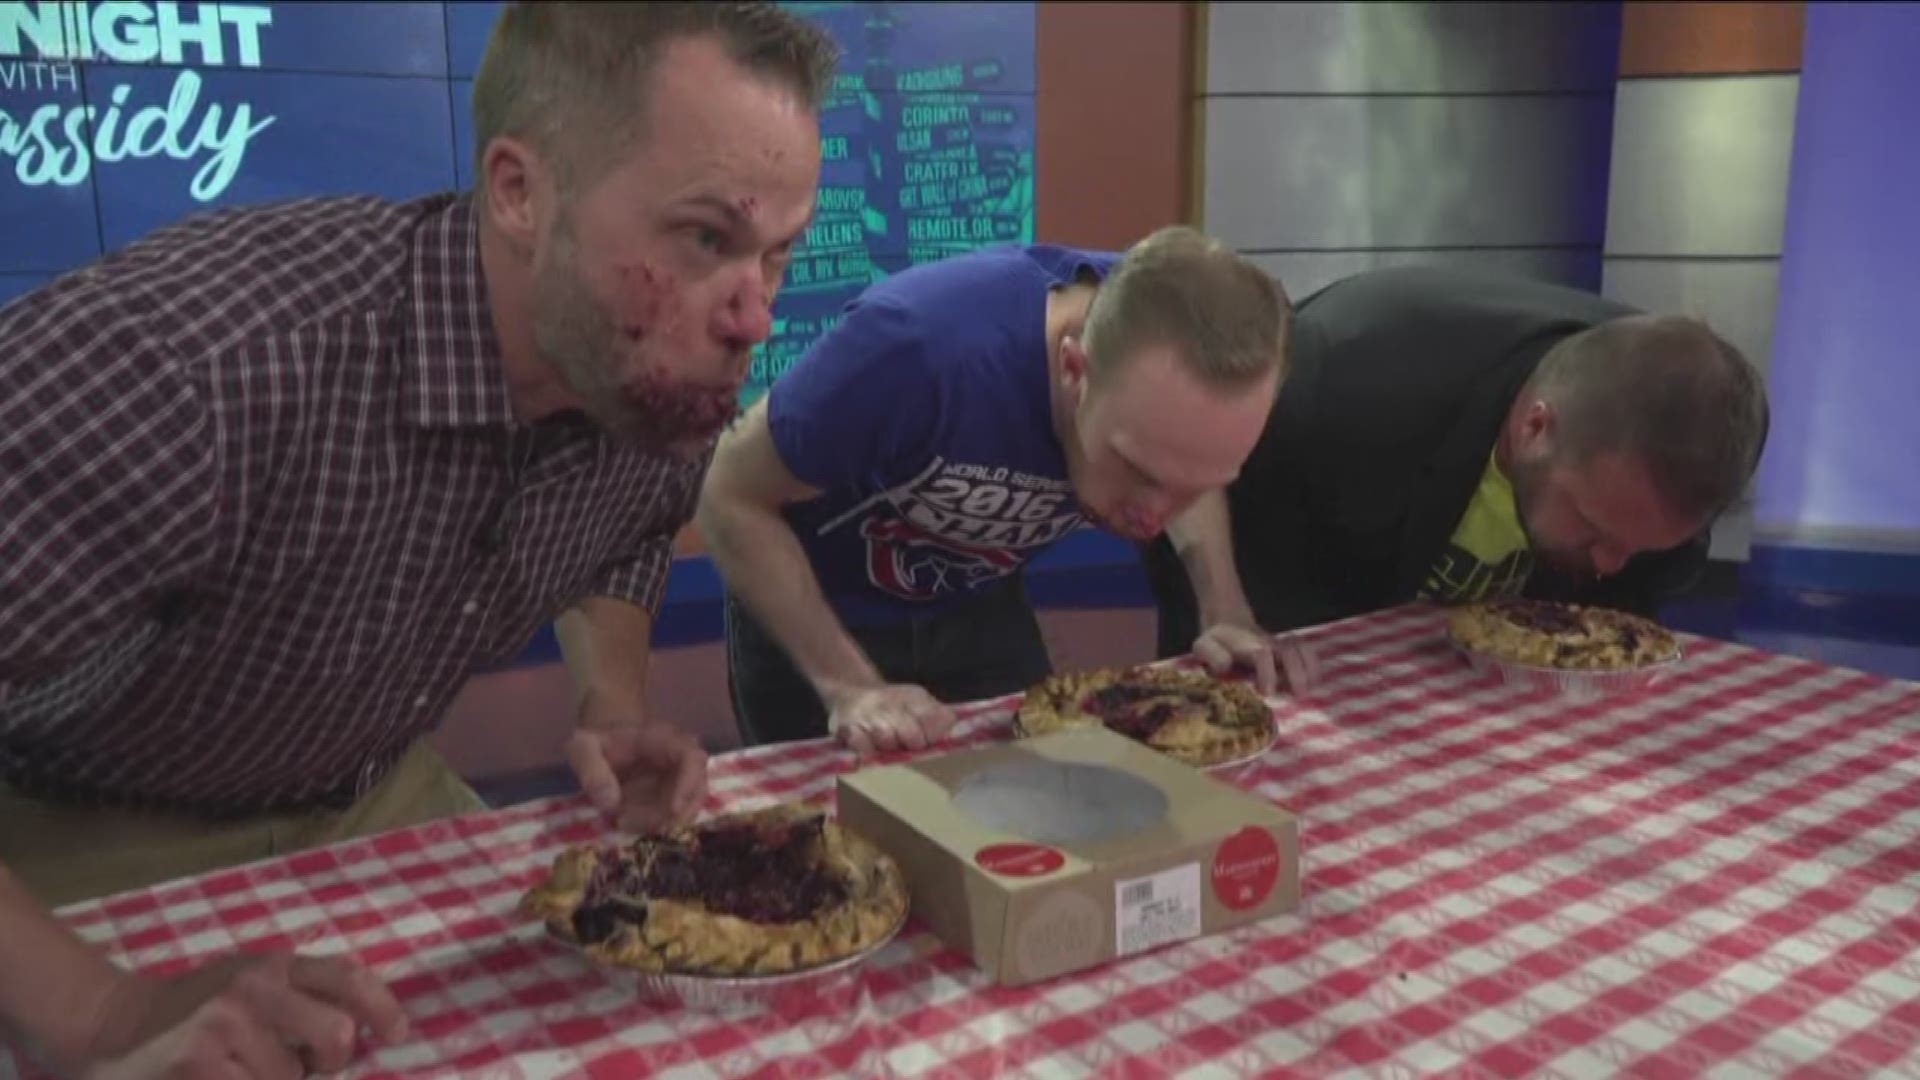 We get ready for the Oregon State Fair with our very own pie eating contest...and it gets messy.

oregonstatefair.org

#TonightwithCassidy